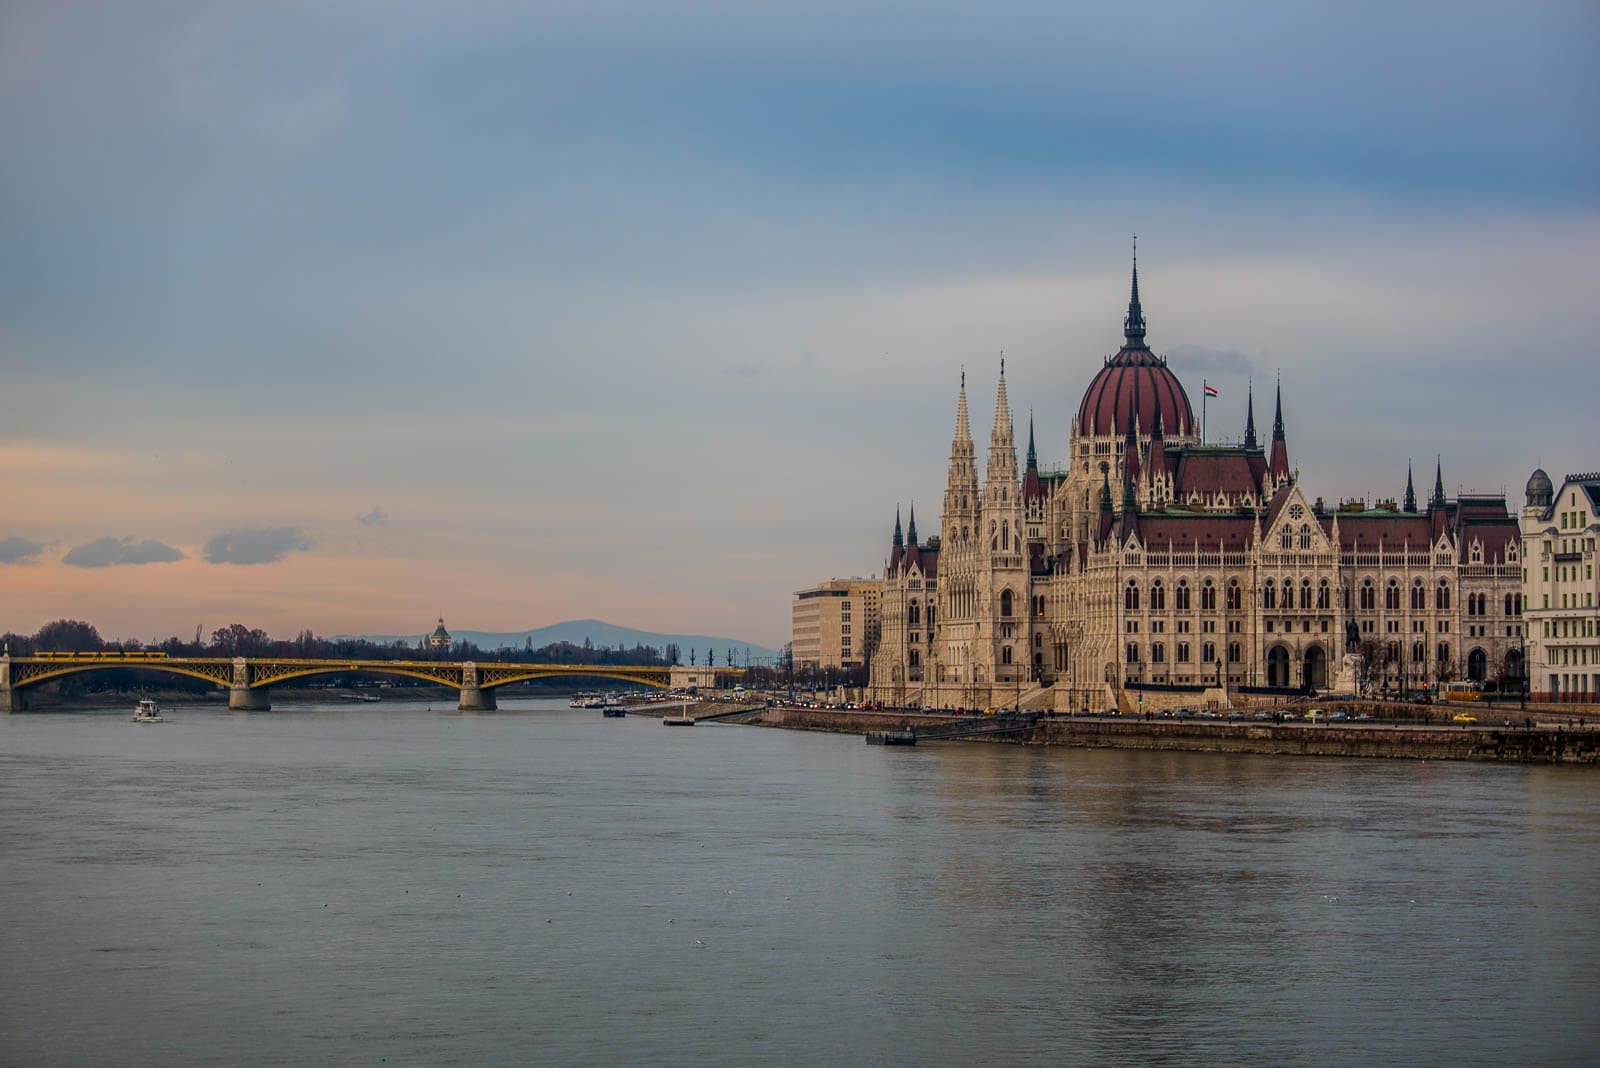 The hungarian parliament building on the danube river.